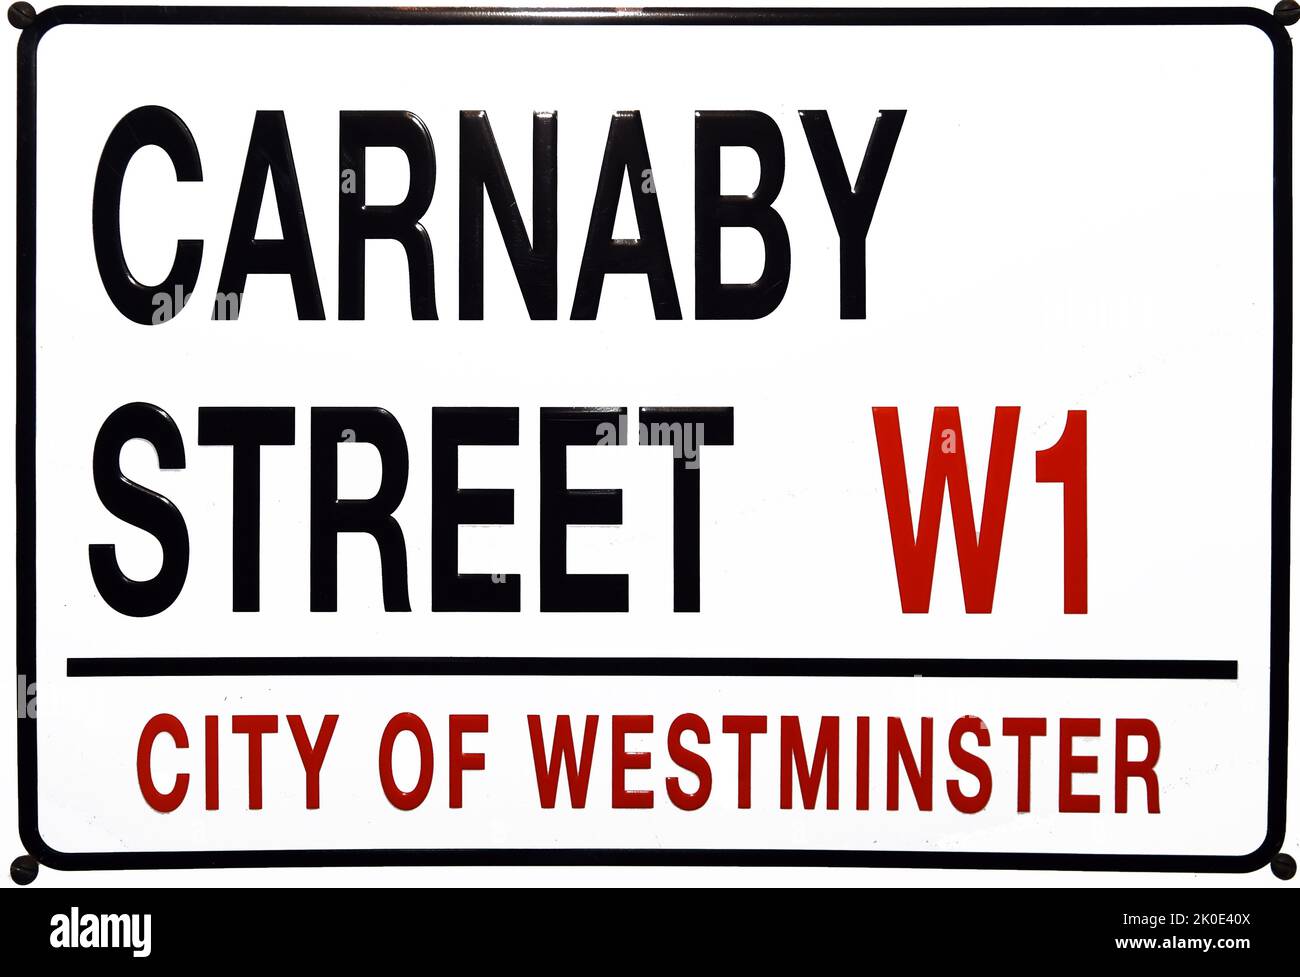 Carnaby Steet, street sign of the famous fashion street in the City of Westminster, London. Stock Photo